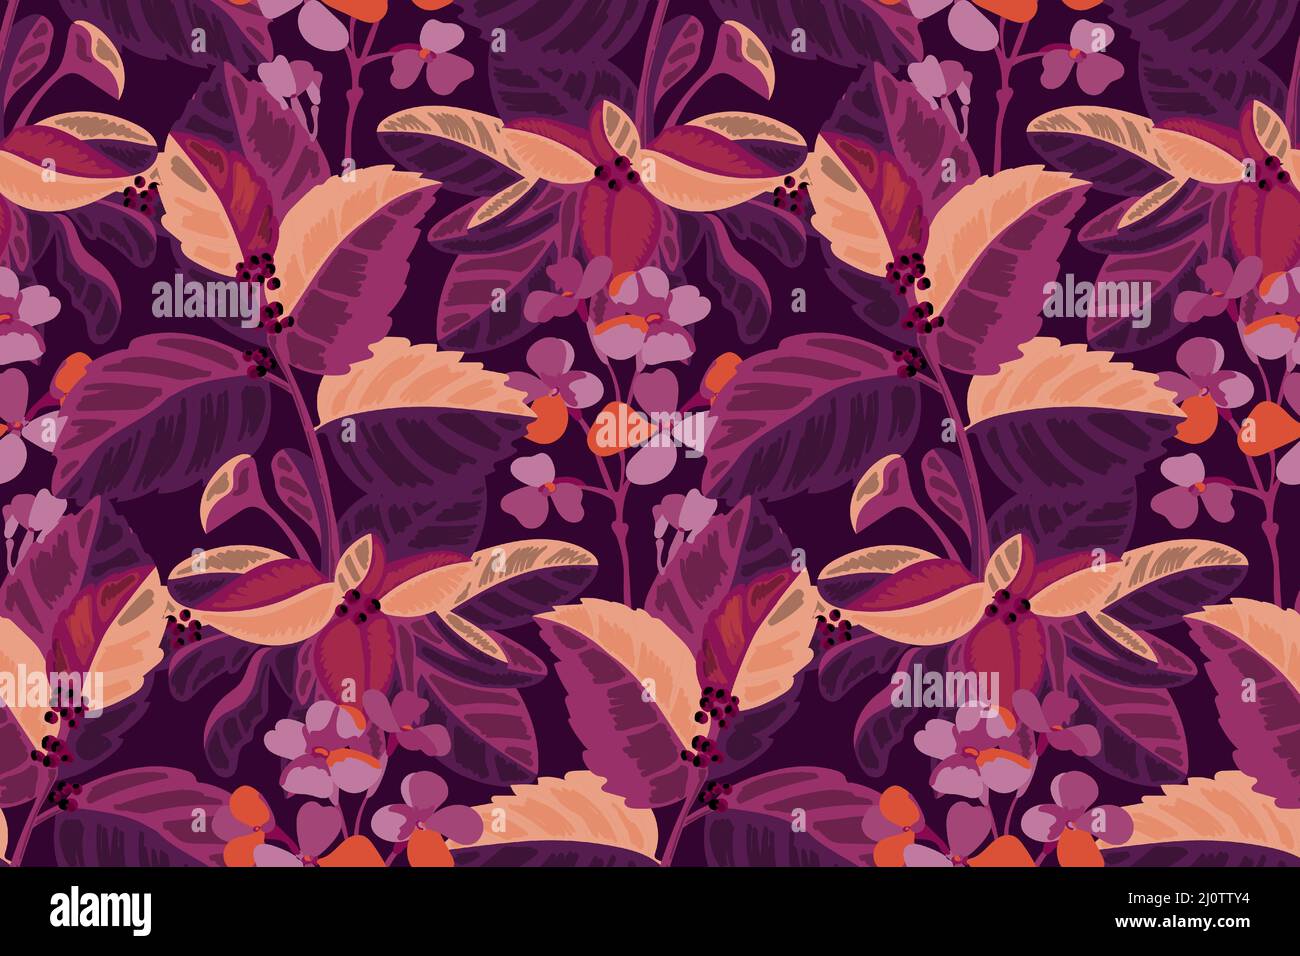 Vector floral seamless pattern. Purple flowers and leaves isolated on a burgundy background. Stock Vector